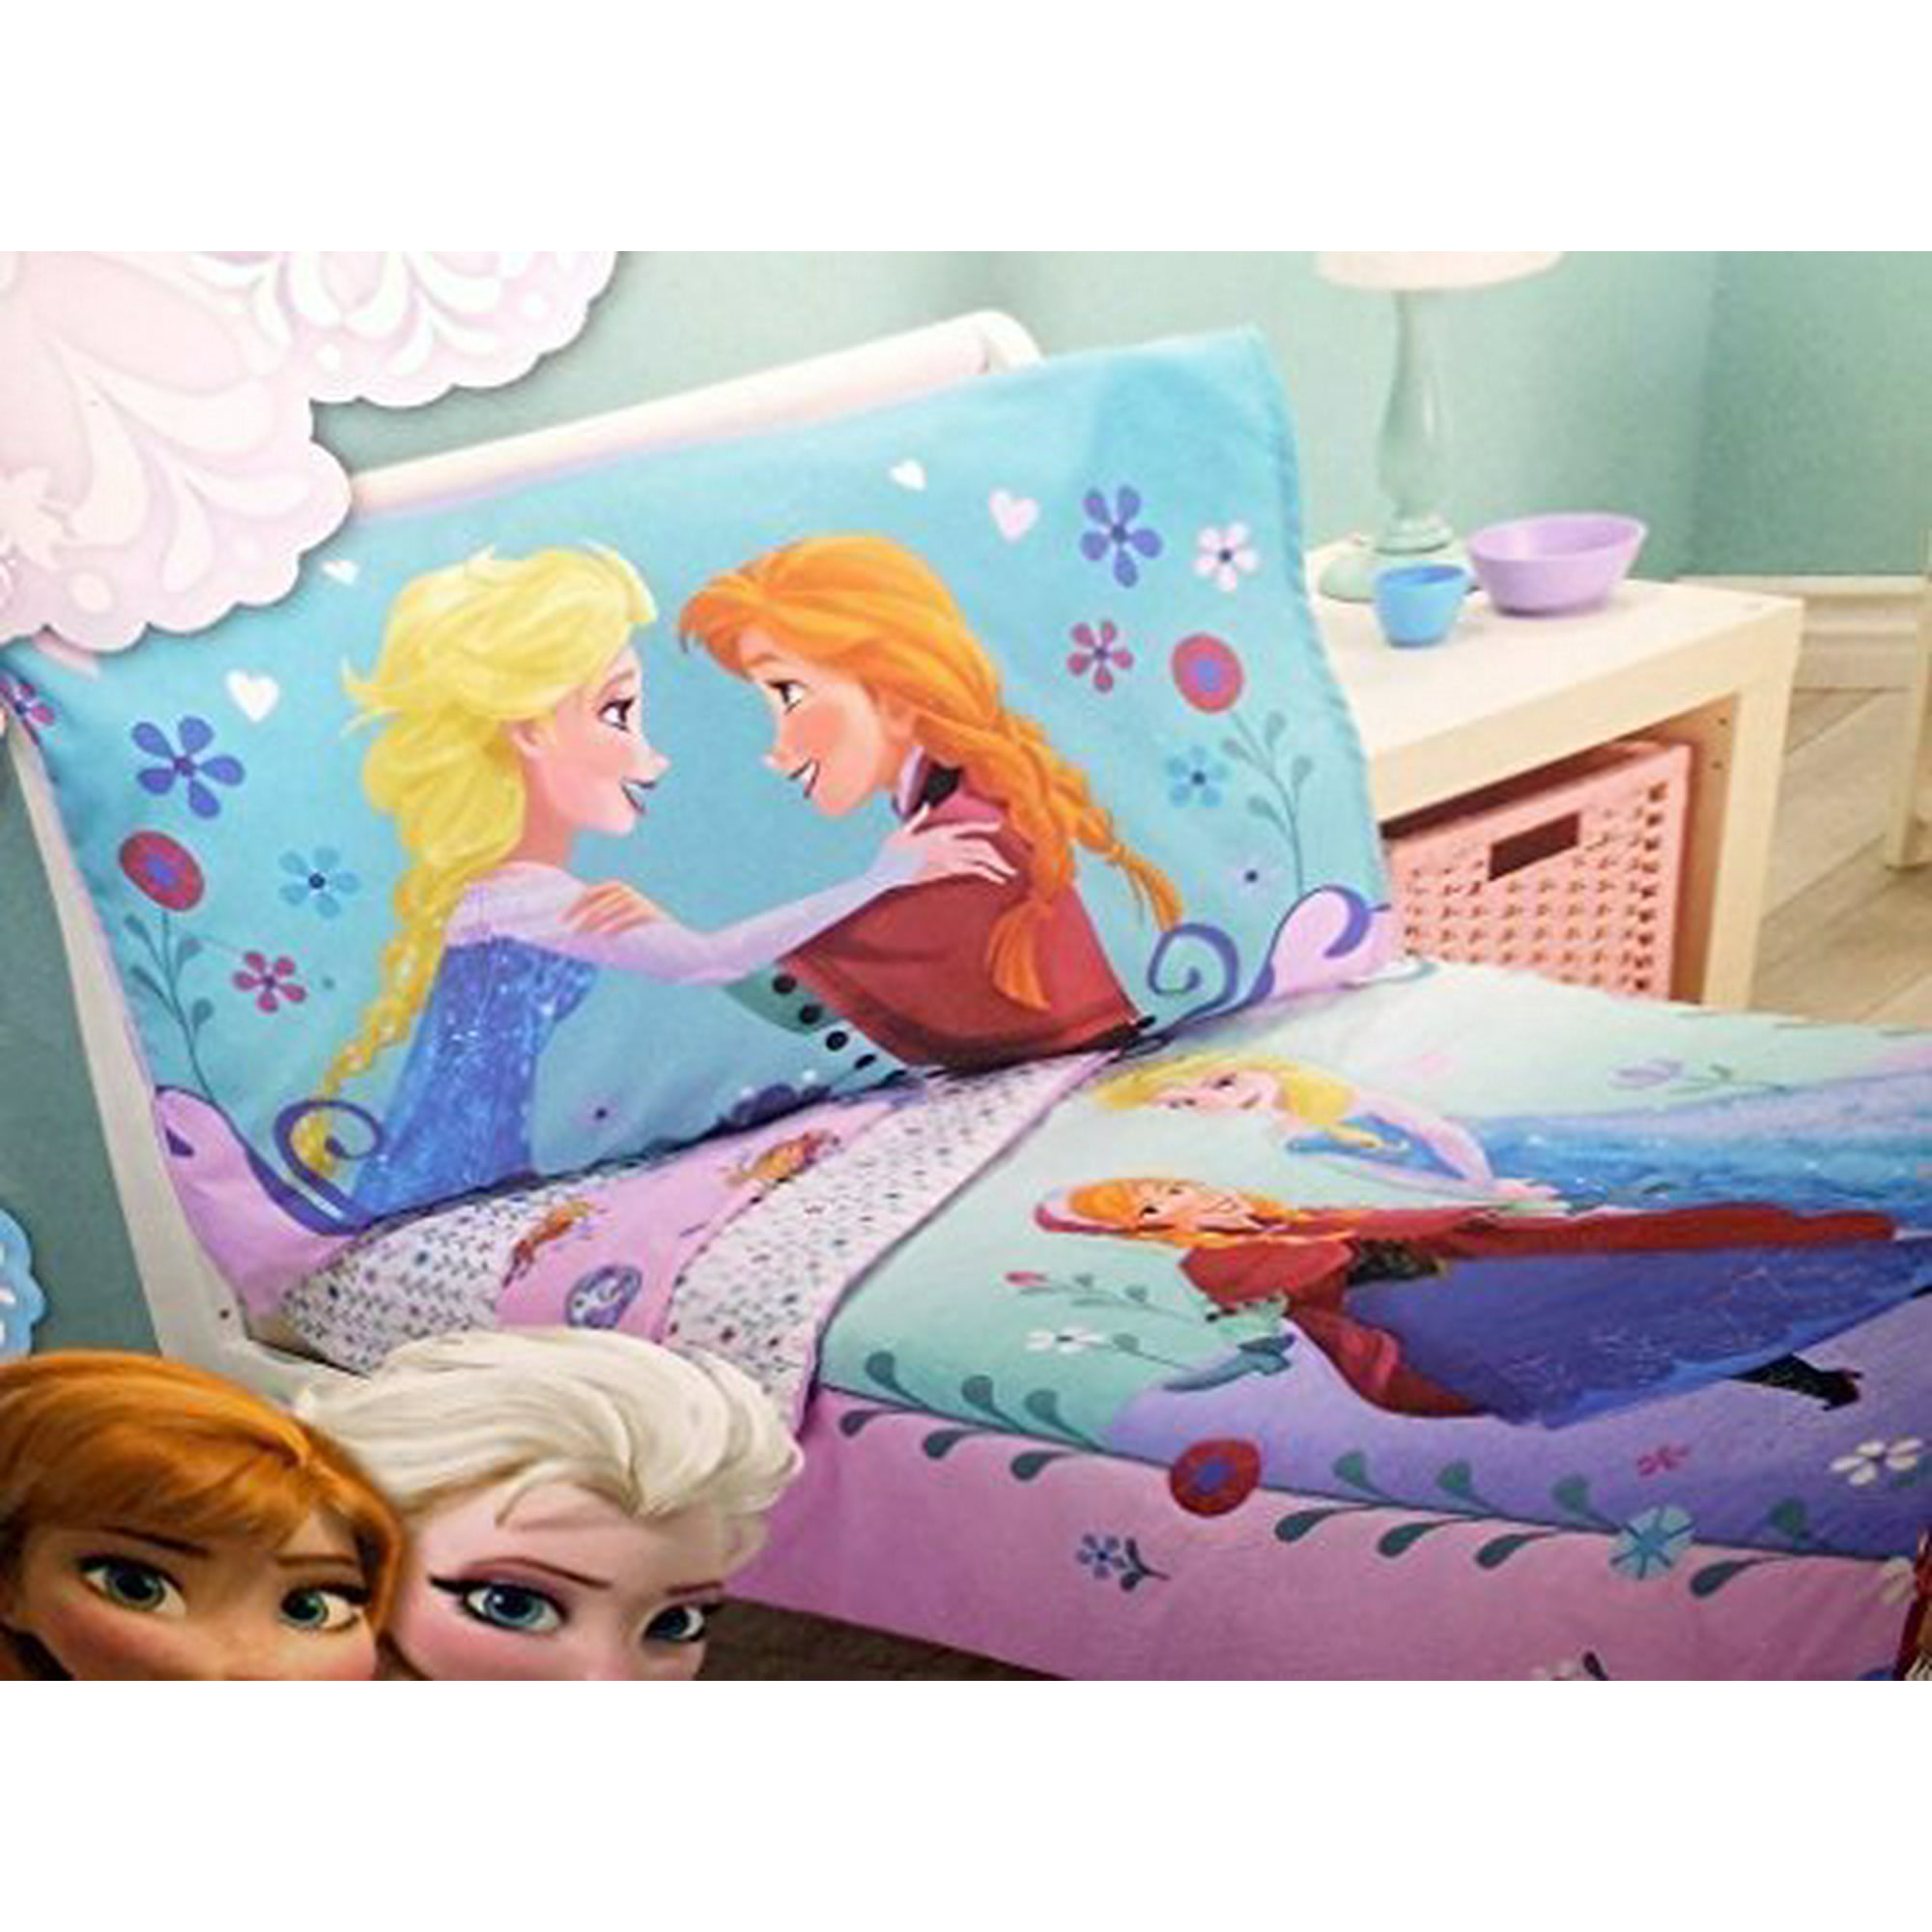 Disney Frozen 4 Piece Toddler Bedding, Will Twin Size Sheets Fit A Toddler Bed